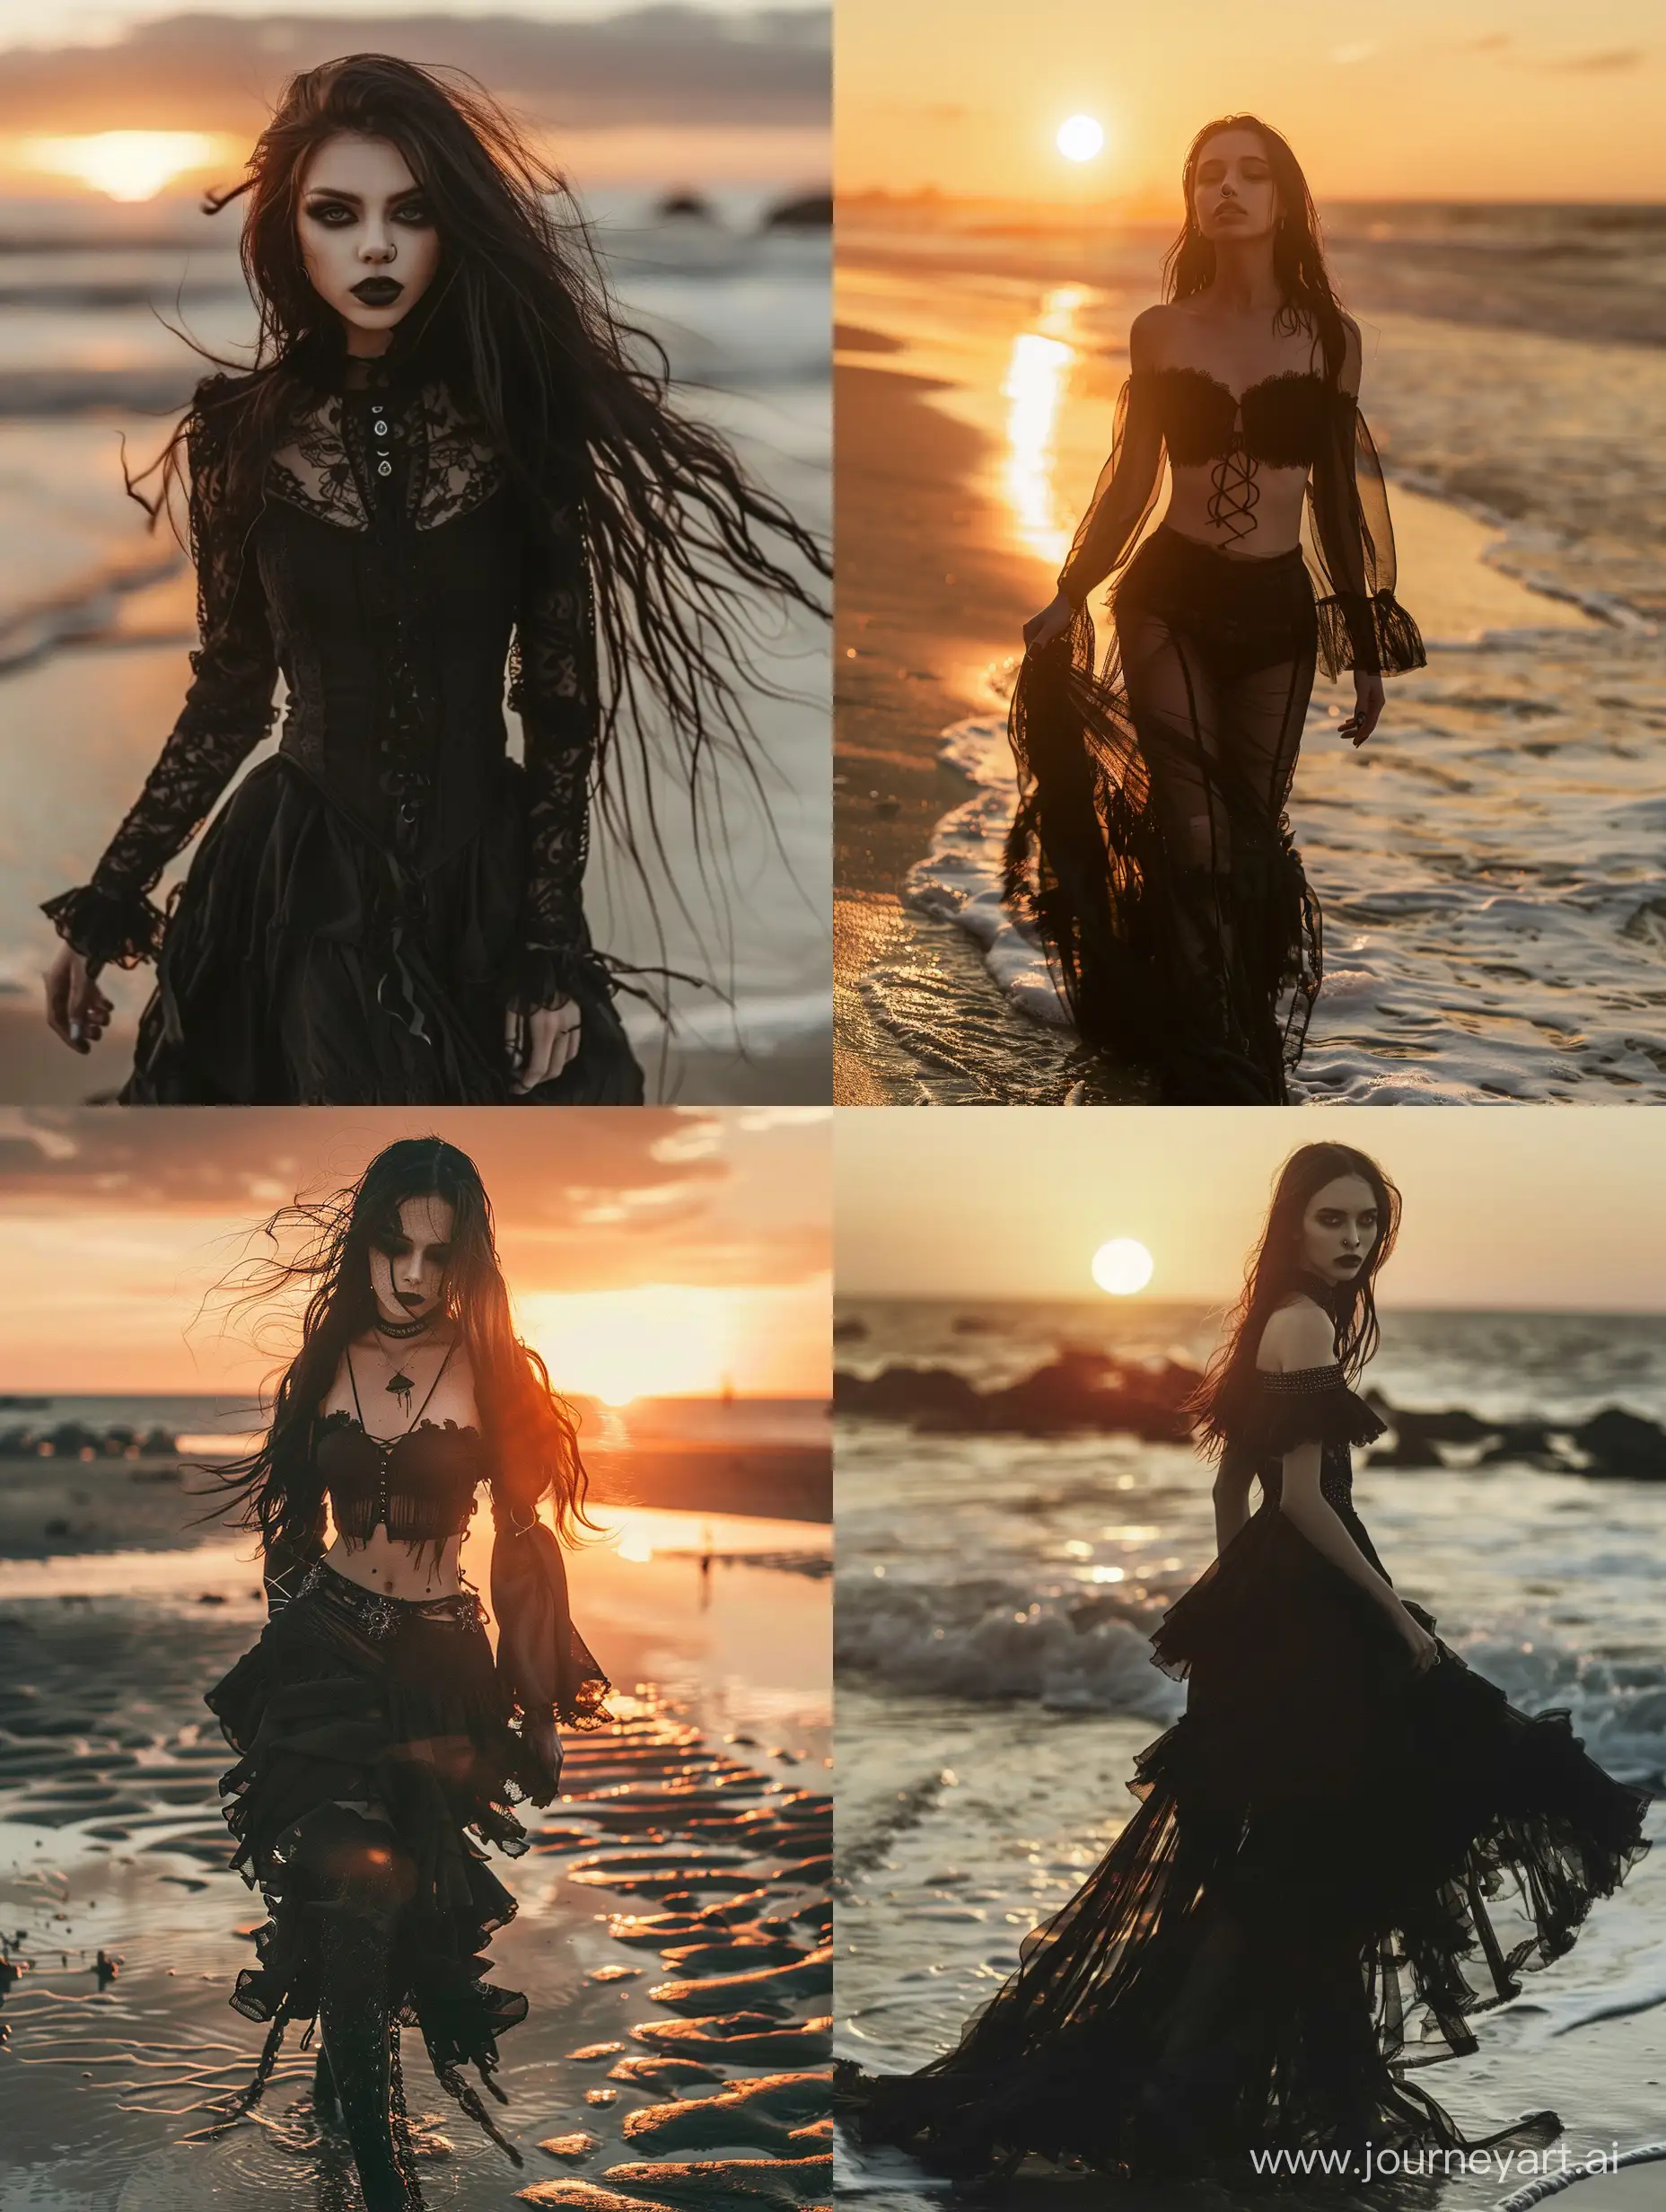 Goth-Model-Walking-at-Sunset-Macabre-Romanticism-in-High-Contrast-Lighting